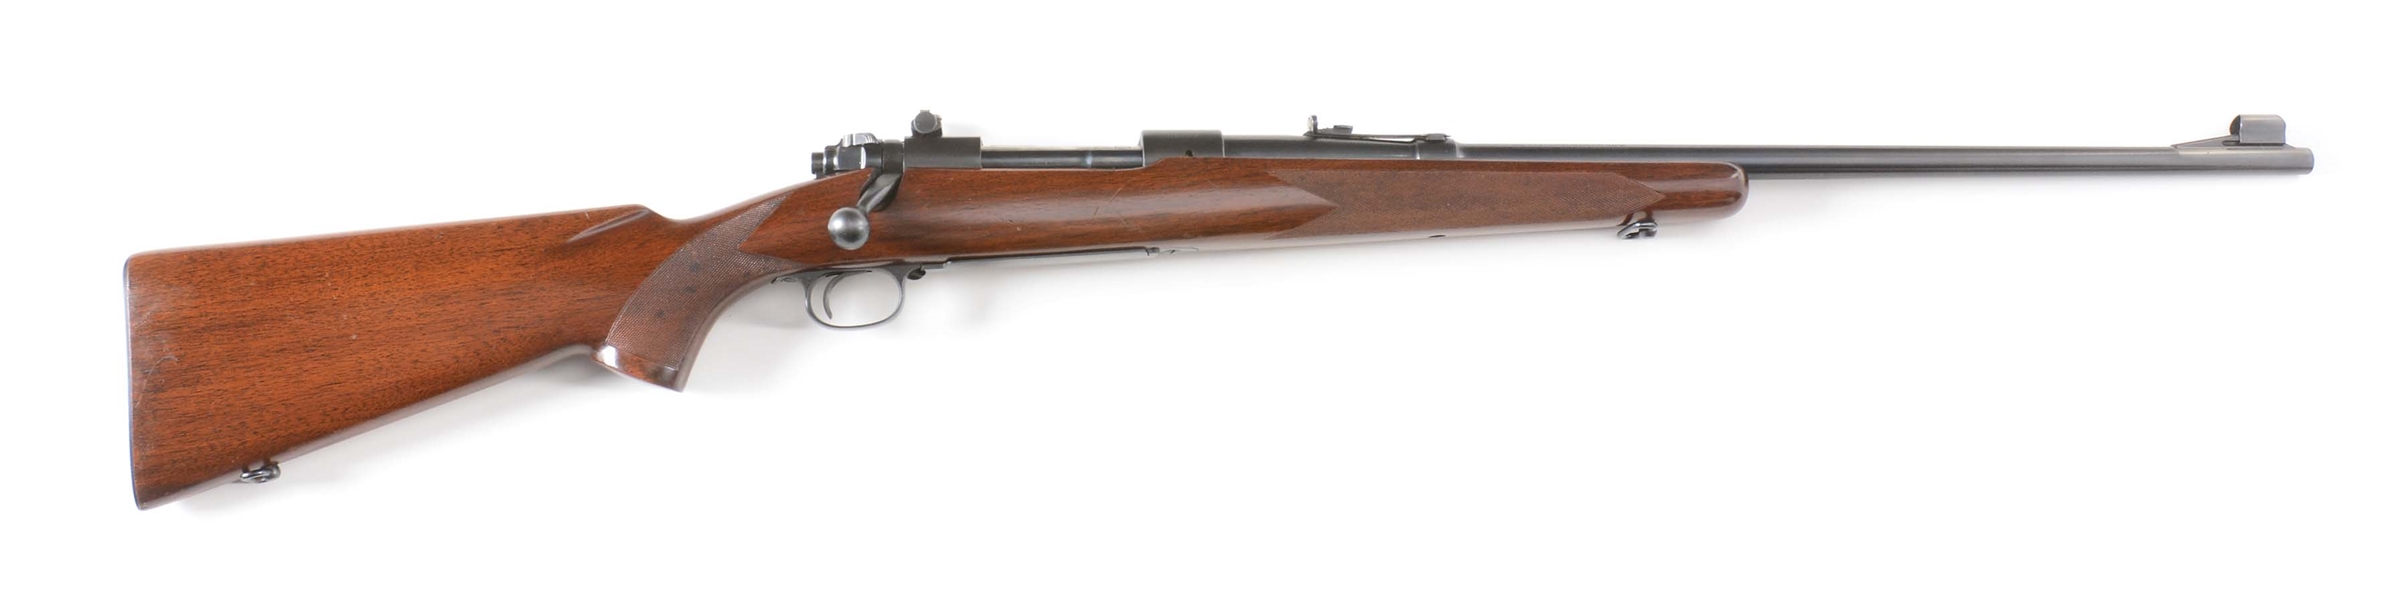 (C) WINCHESTER MODEL 70 BOLT ACTION RIFLE REFINISHED AND CONVERTED TO 7MM.